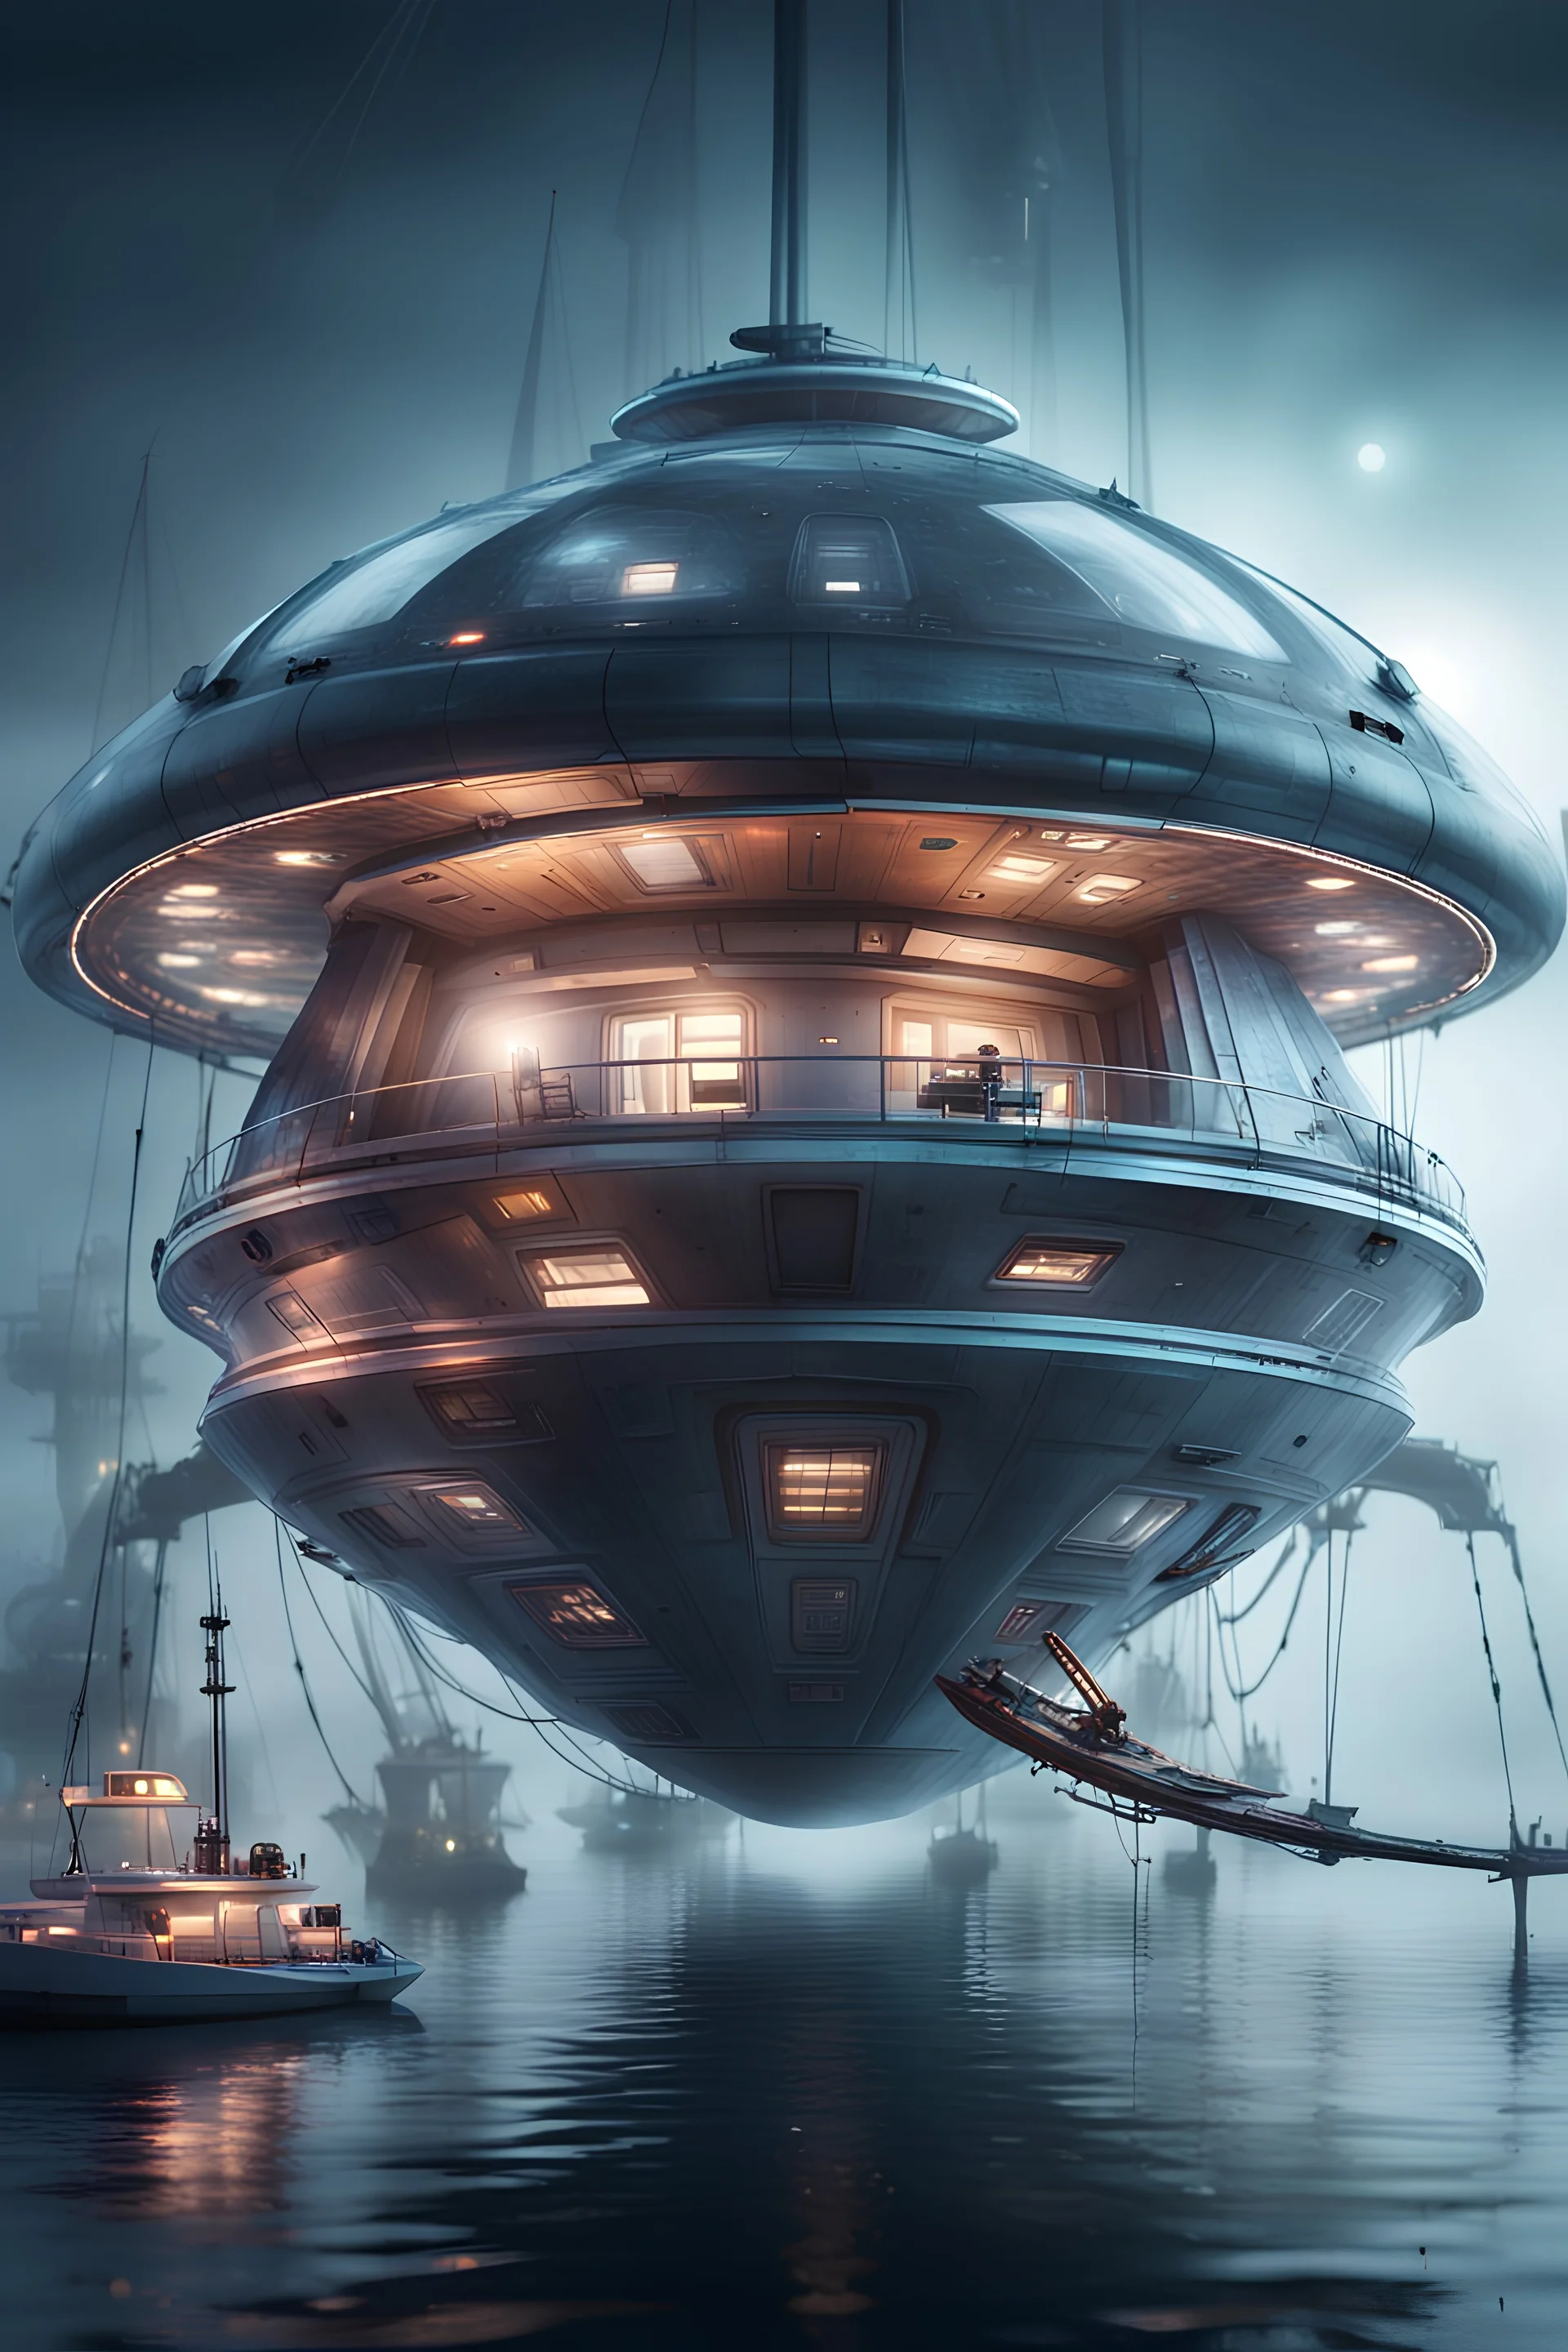 weird boat with supports to keep it stable, book cover pen illustration, portrait of captain on a misty catamaran dome modular house sub that looks like a dark twisted alien space ship with spotlights, in advanced hi tech dock, bokeh like f/0.8, tilt-shift lens 8k, high detail, smooth render, down-light, unreal engine, prize winning